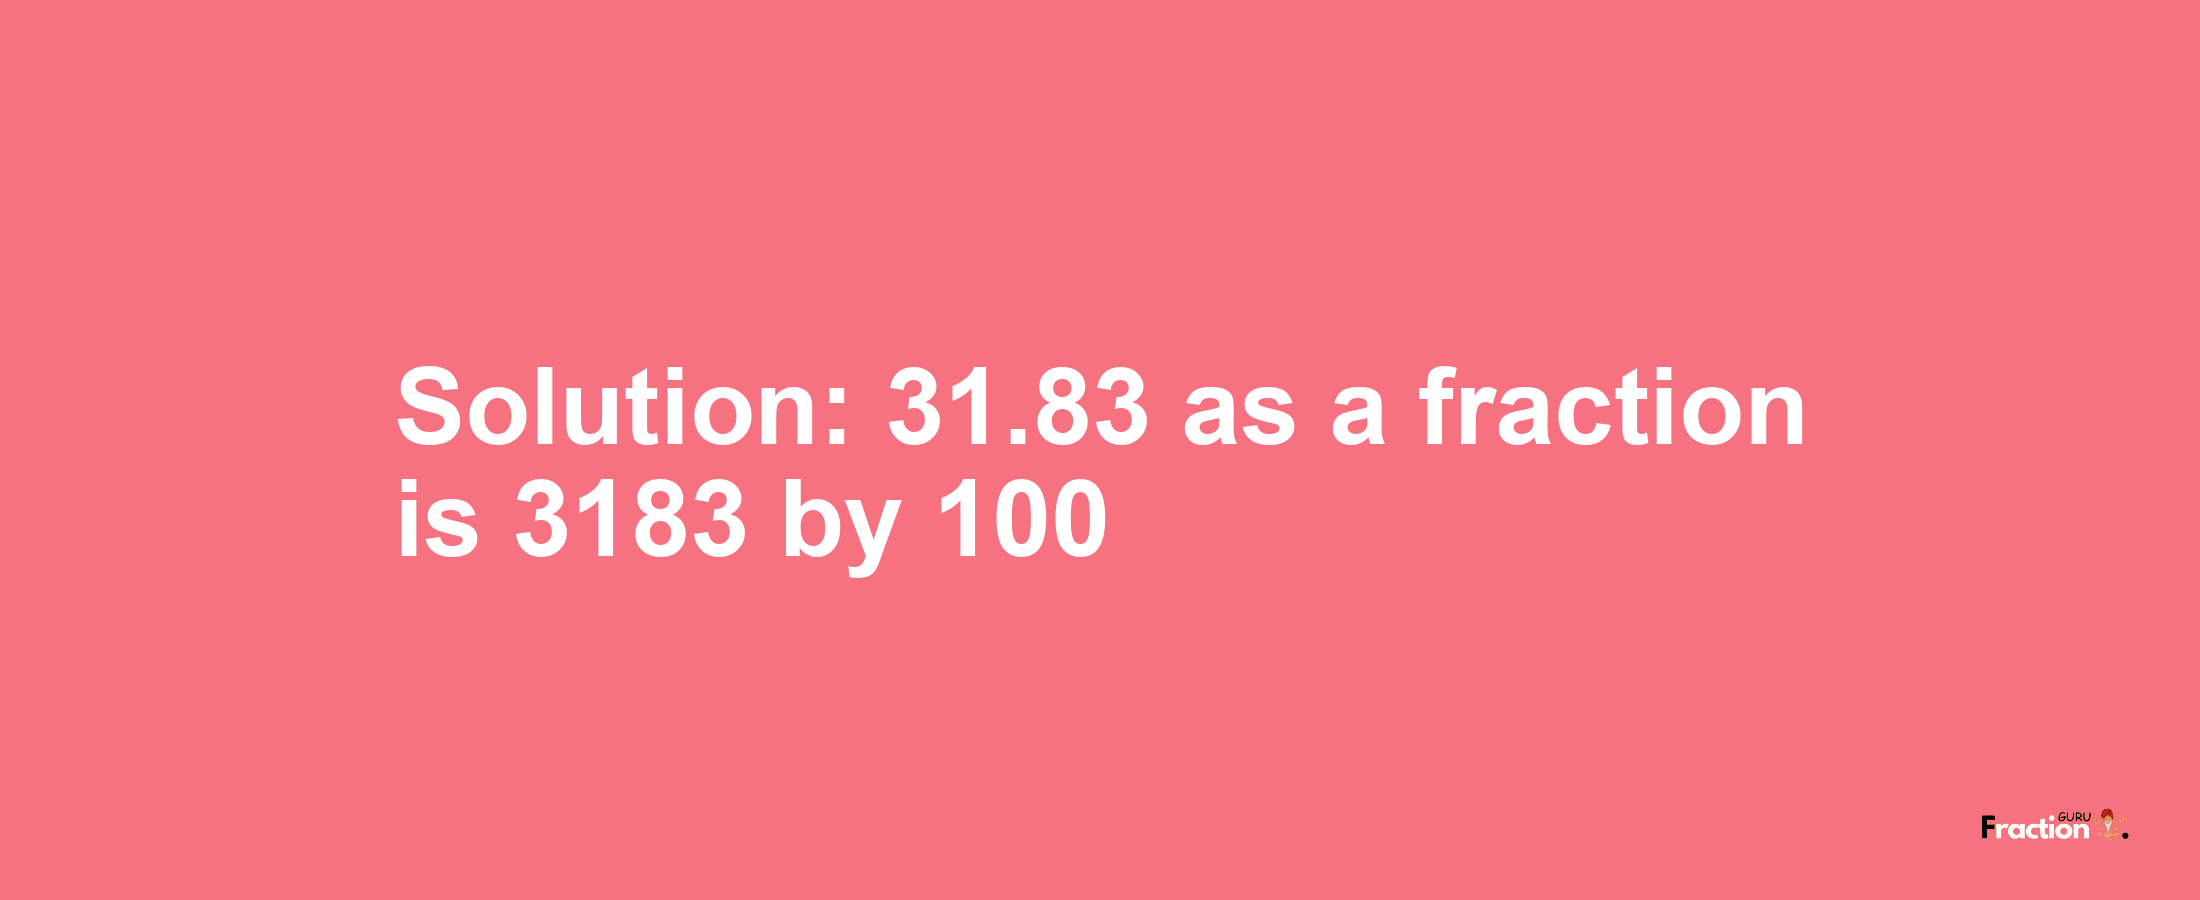 Solution:31.83 as a fraction is 3183/100